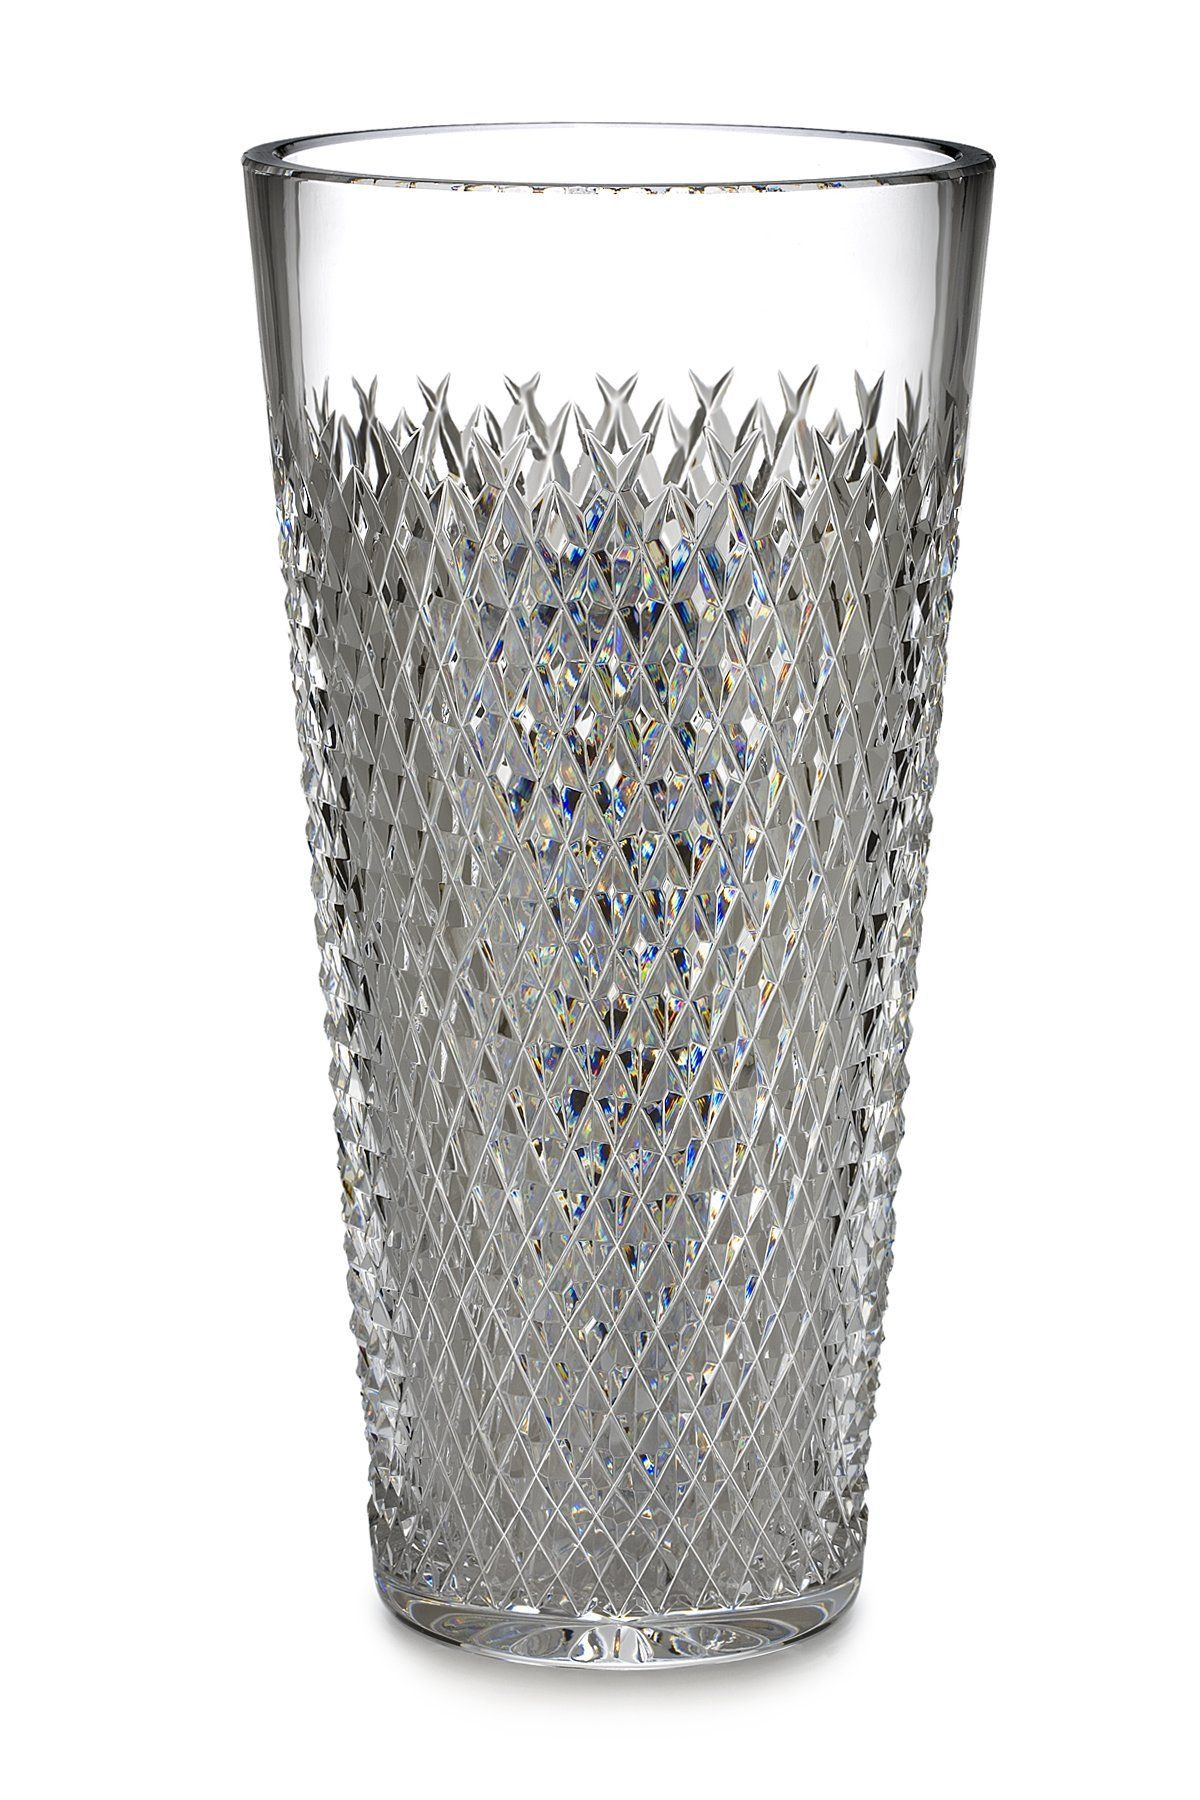 22 Trendy 24 Inch Vases Cheap 2024 free download 24 inch vases cheap of waterford alana 12 inch vase 12 inch vase crystal alana vases pertaining to waterford alana 12 inch vase 12 inch vase crystal alana